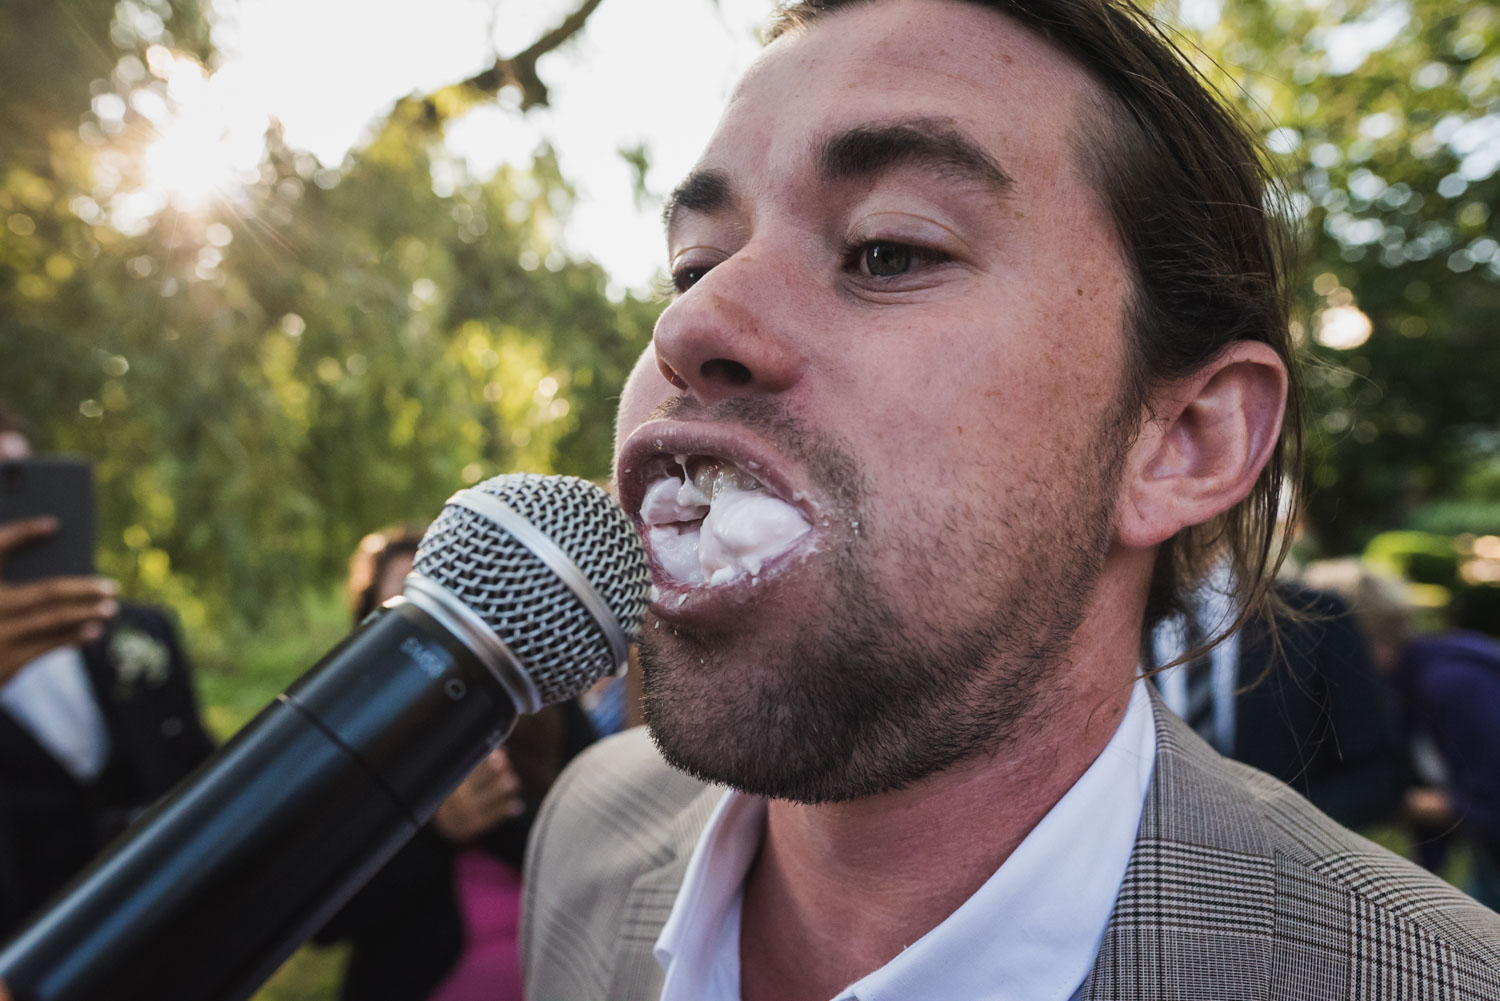 chubby bunny game at outdoor wedding, Carine Bea Photography